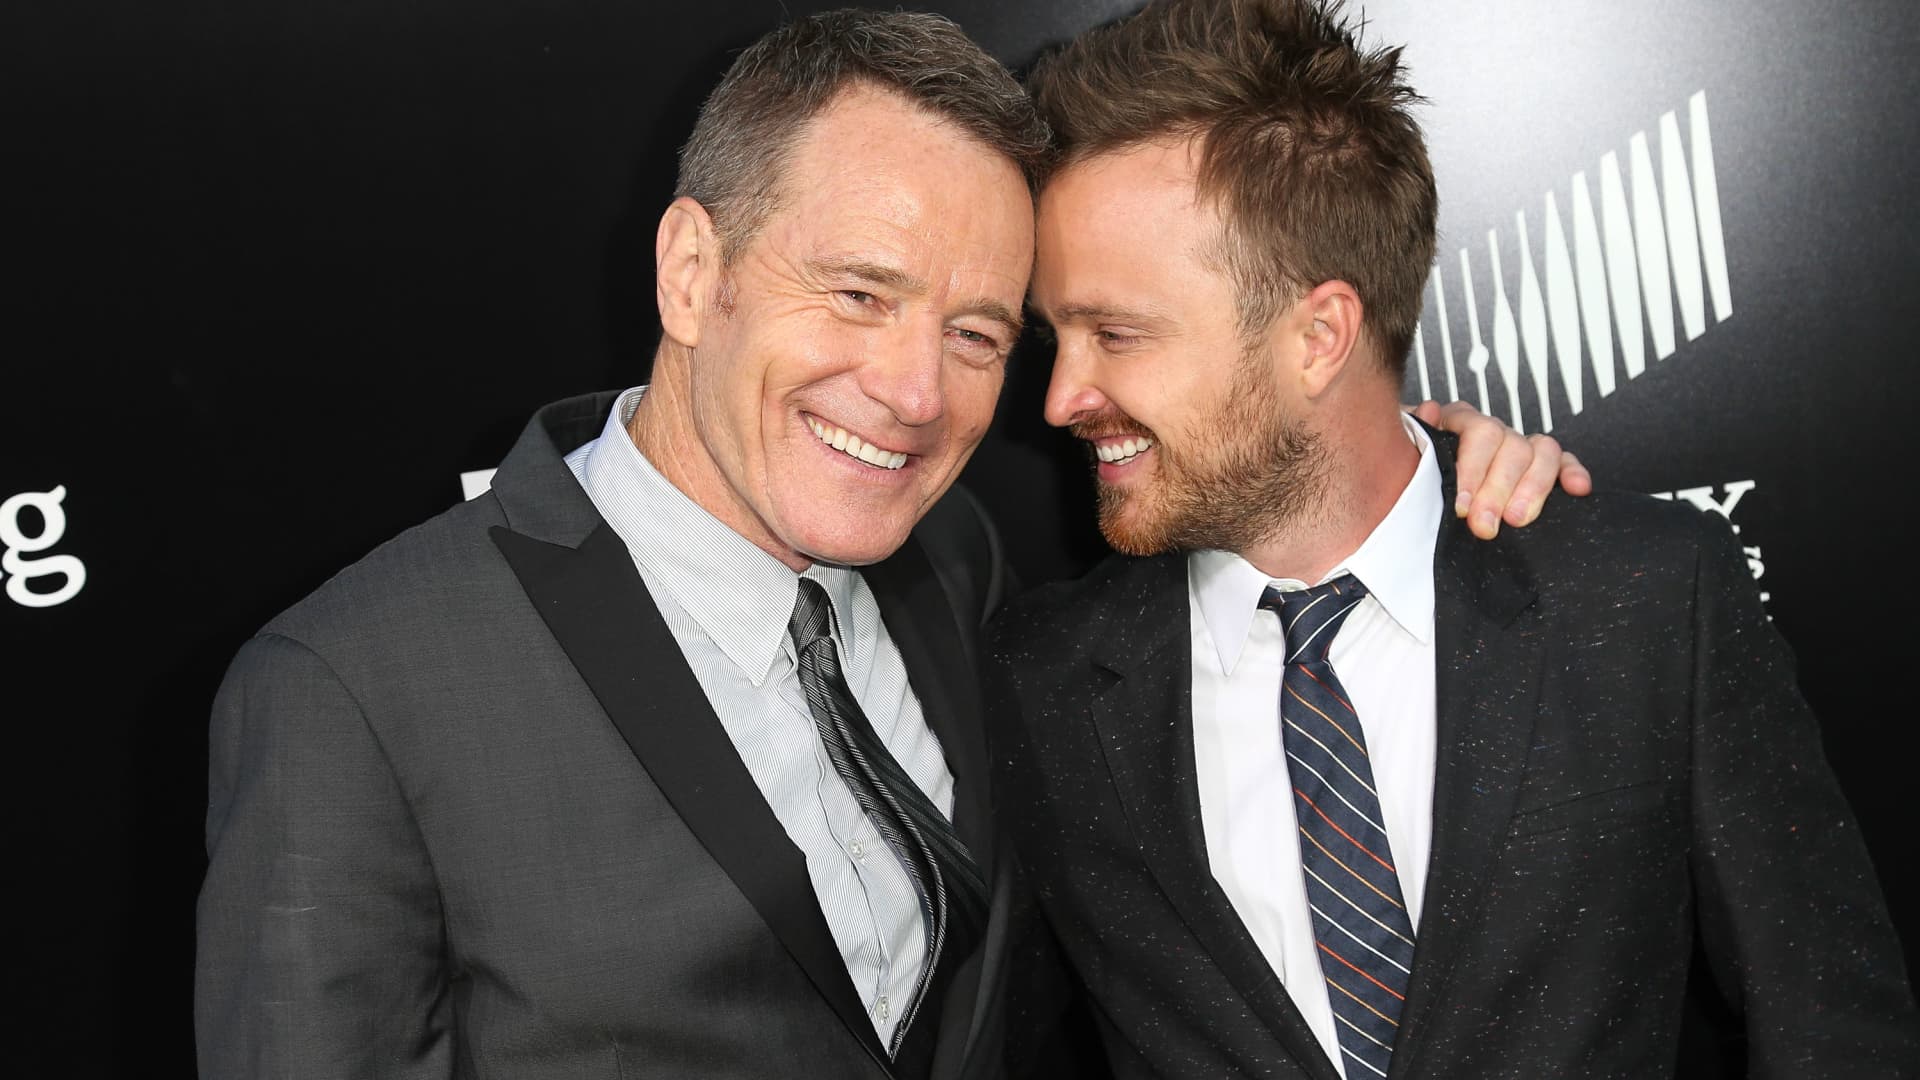 Bryan Cranston and Aaron Paul on building the Dos Hombres brand